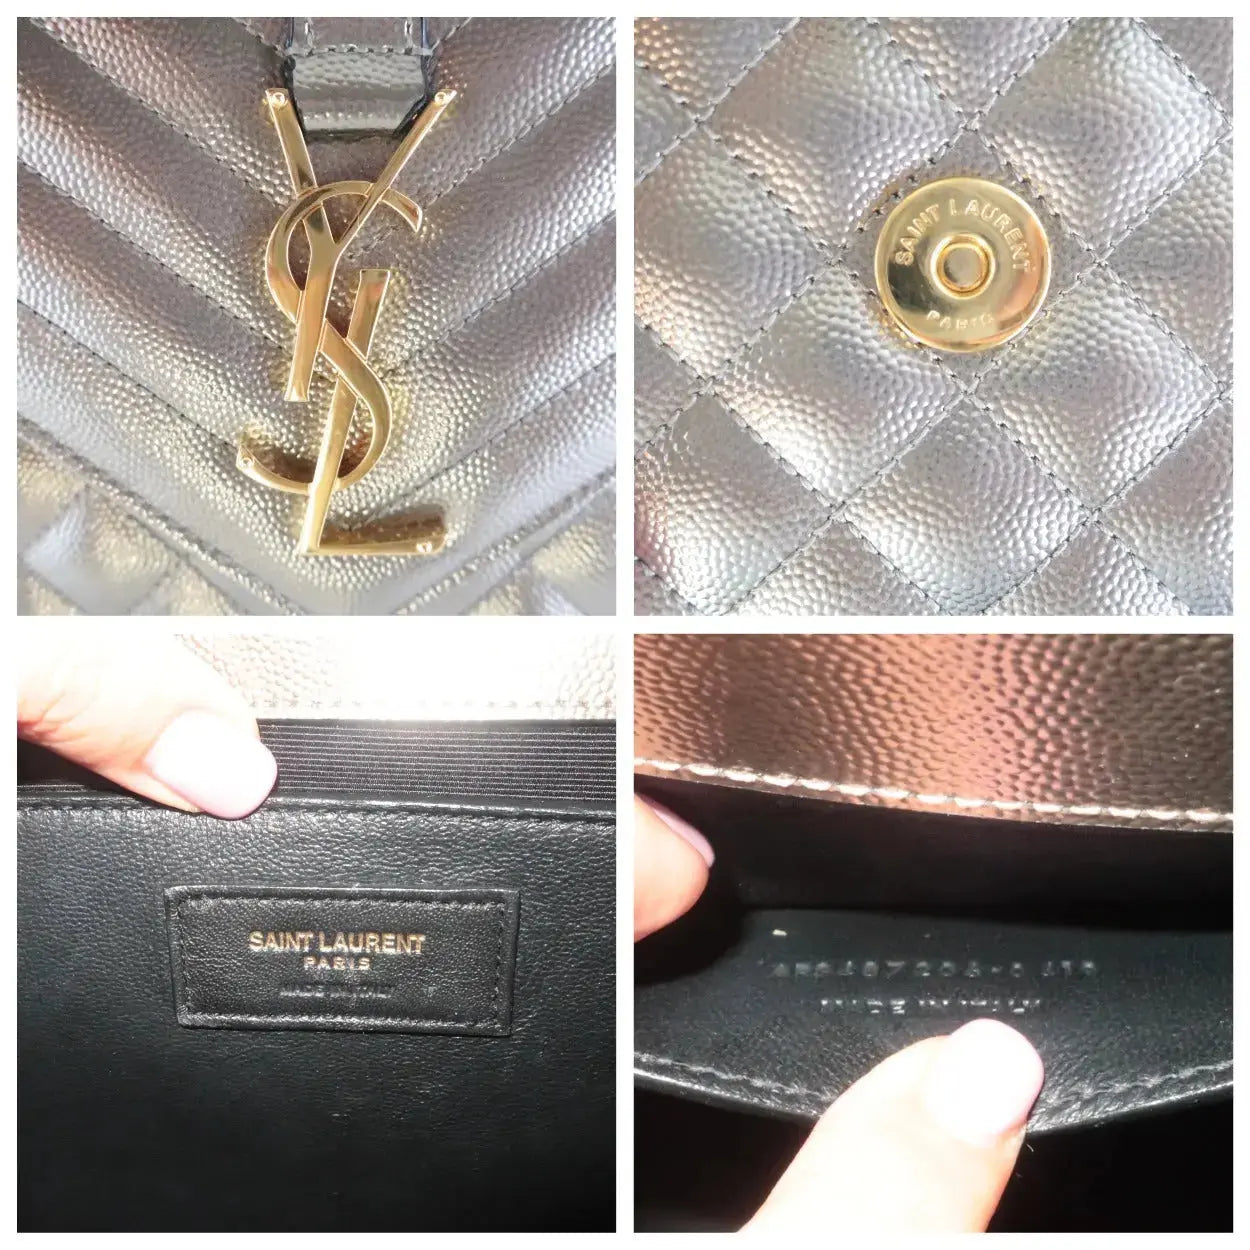 Medium Yves Saint Laurent Envelope Bag On Sale  Unboxing, Review, Styling,  & What Fits Inside 